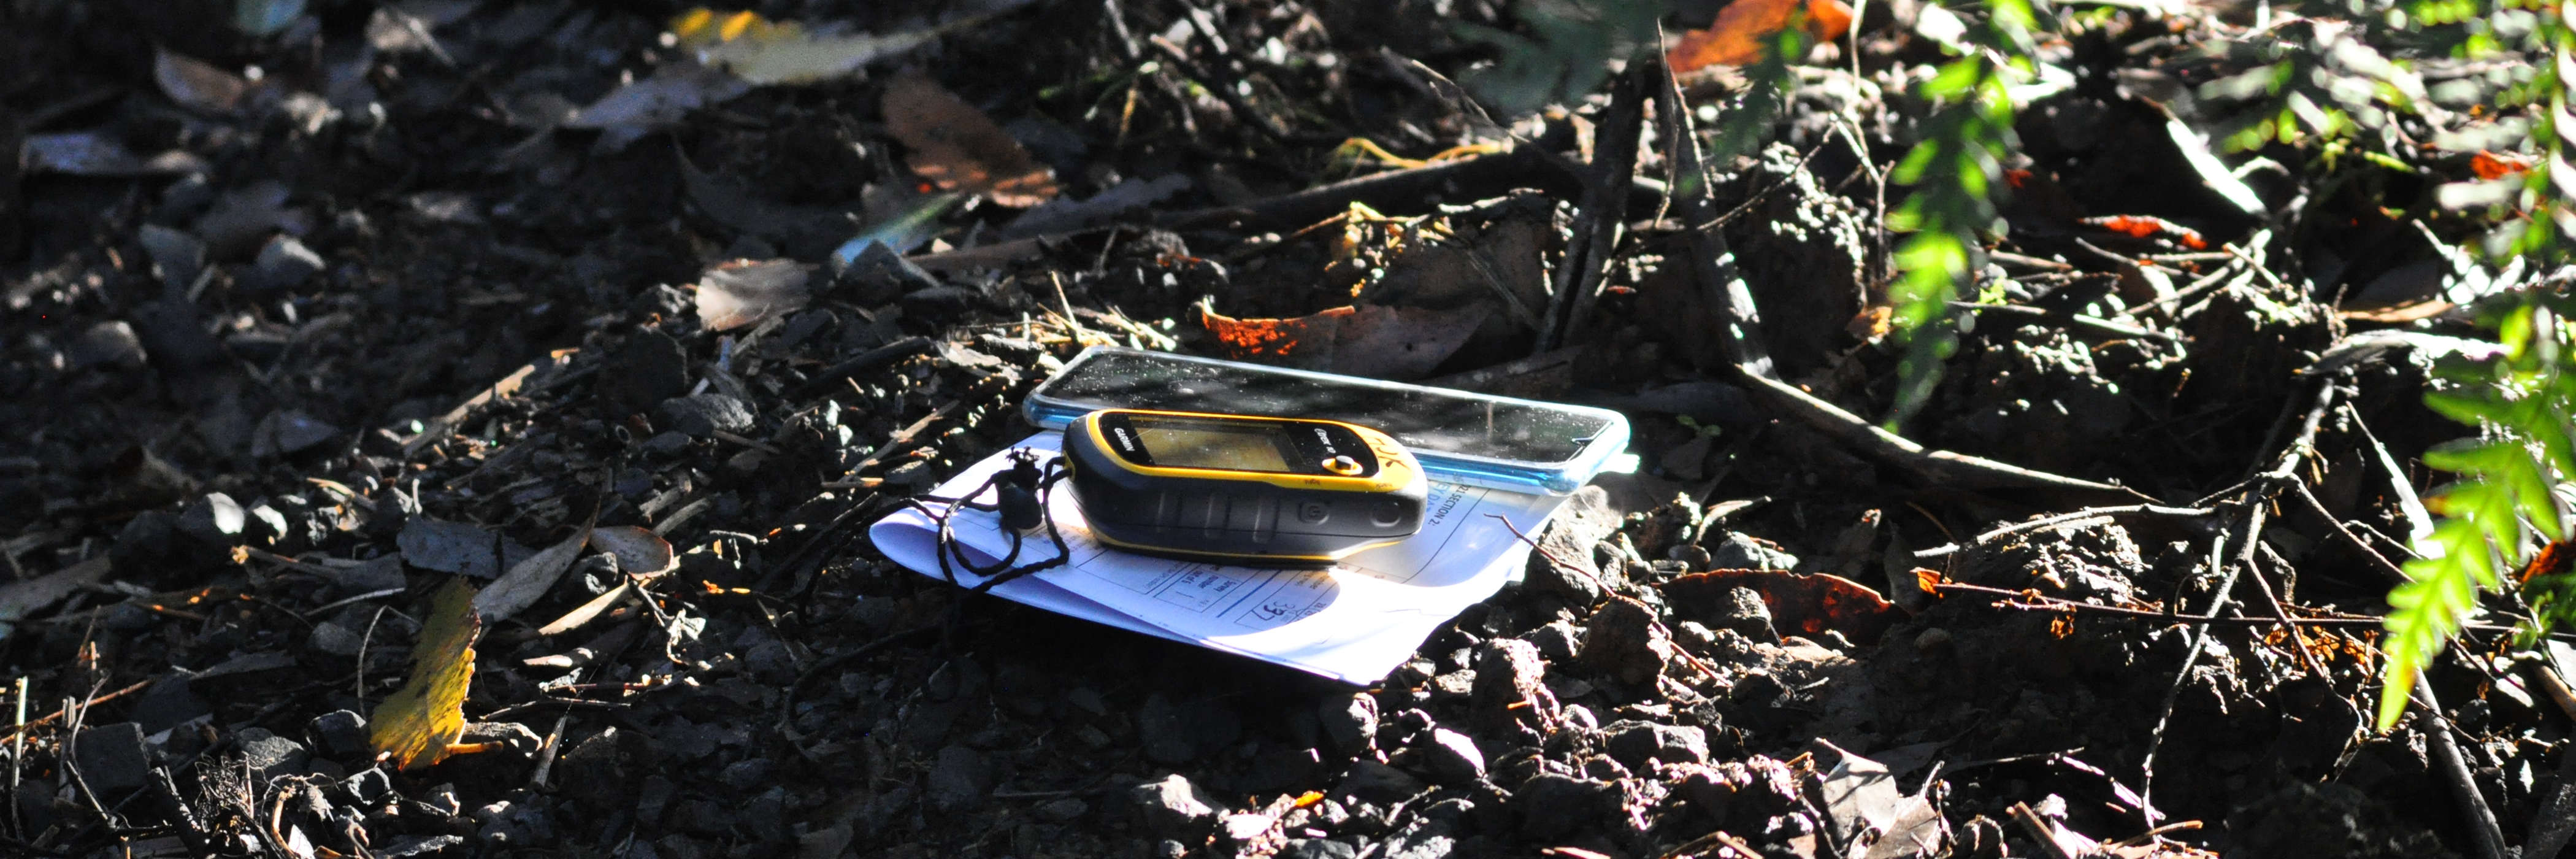 A GPS and smart phone, on top of some folded survey datasheets, lie on wet soil beside a sunlit fern. Photo: Stephen Anstee.